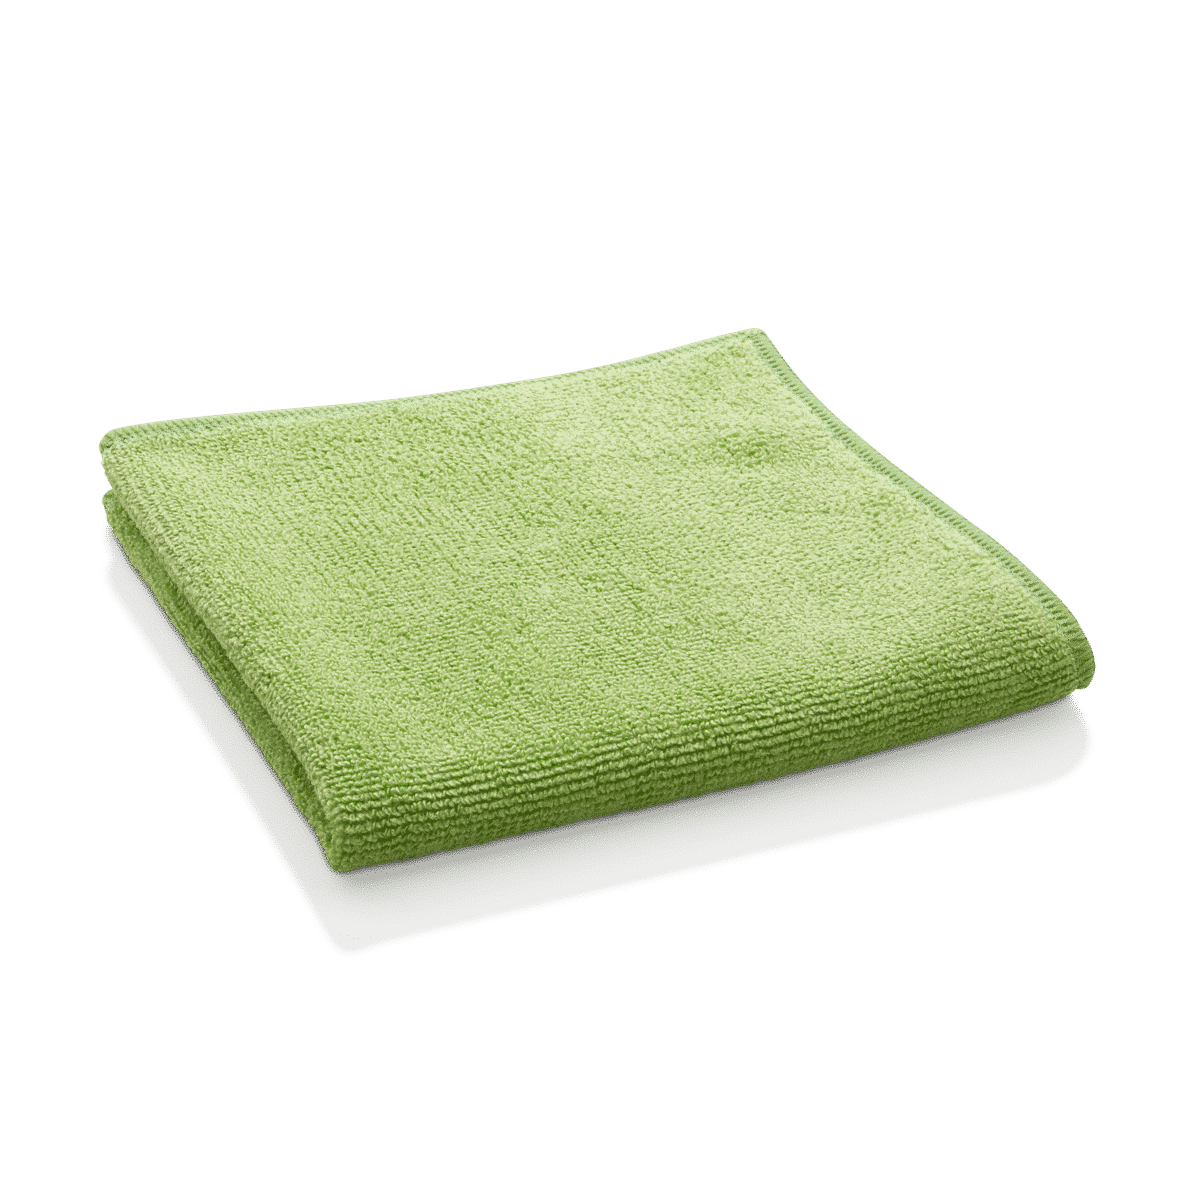 https://gimmethegoodstuff.org/wp-content/uploads/E-Cloth-General-Purpose-Cloth-Green-from-Gimme-the-Good-Stuff-1.png